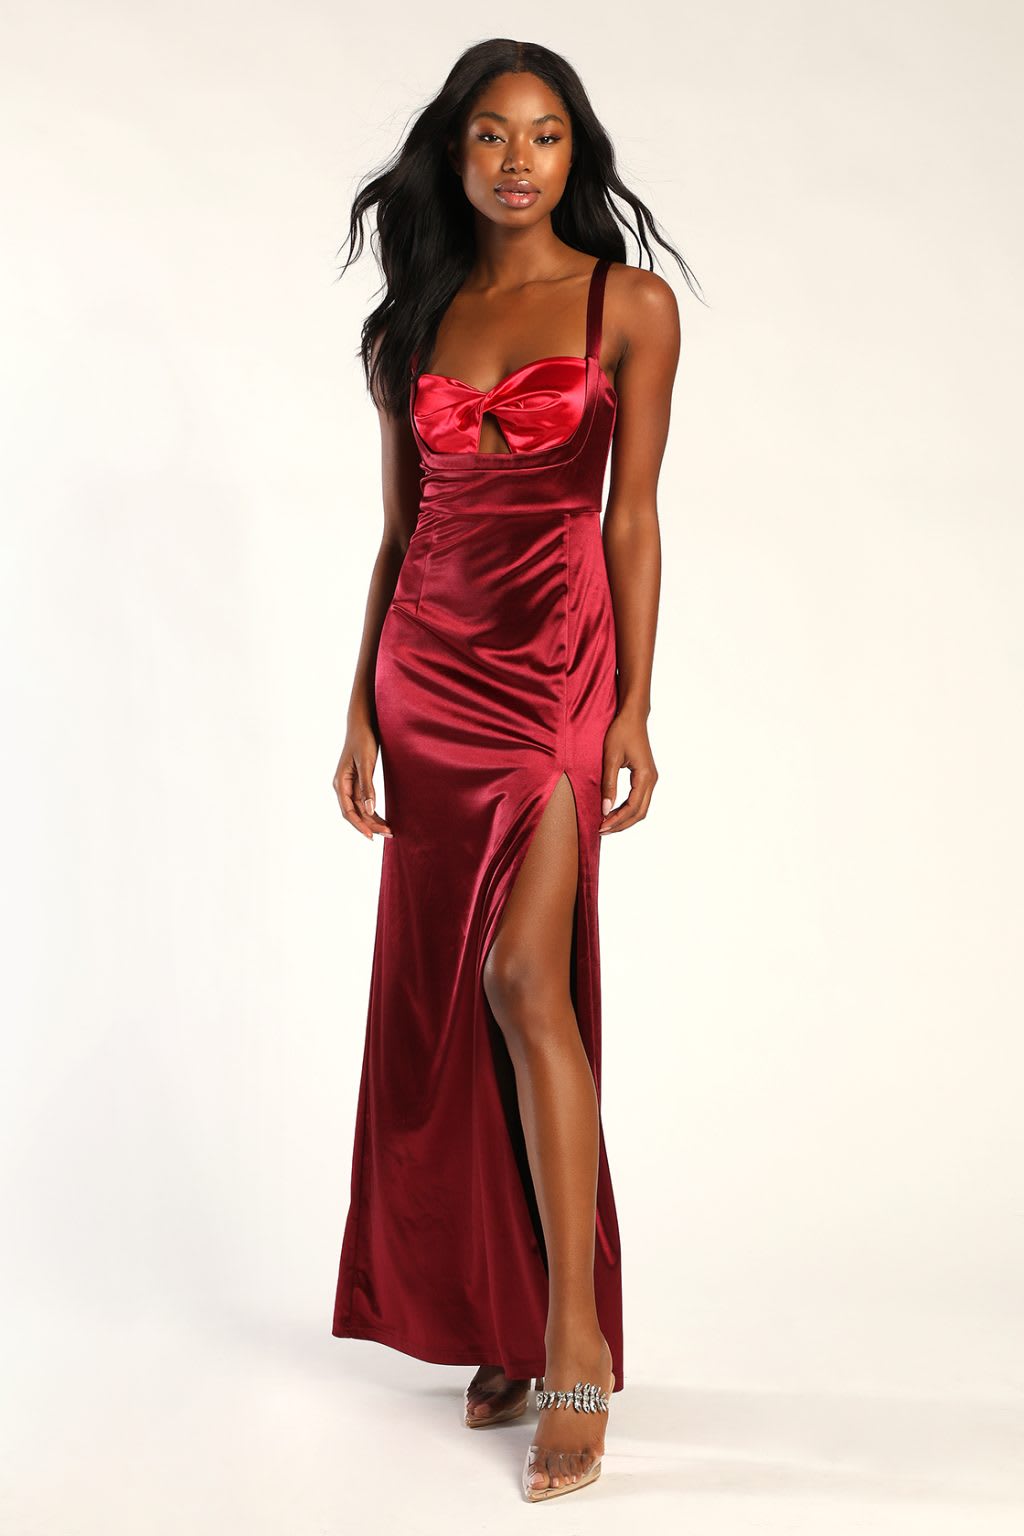 Unique Prom Dresses For A Showstopping 2023 Look - Lulus.com Fashion Blog